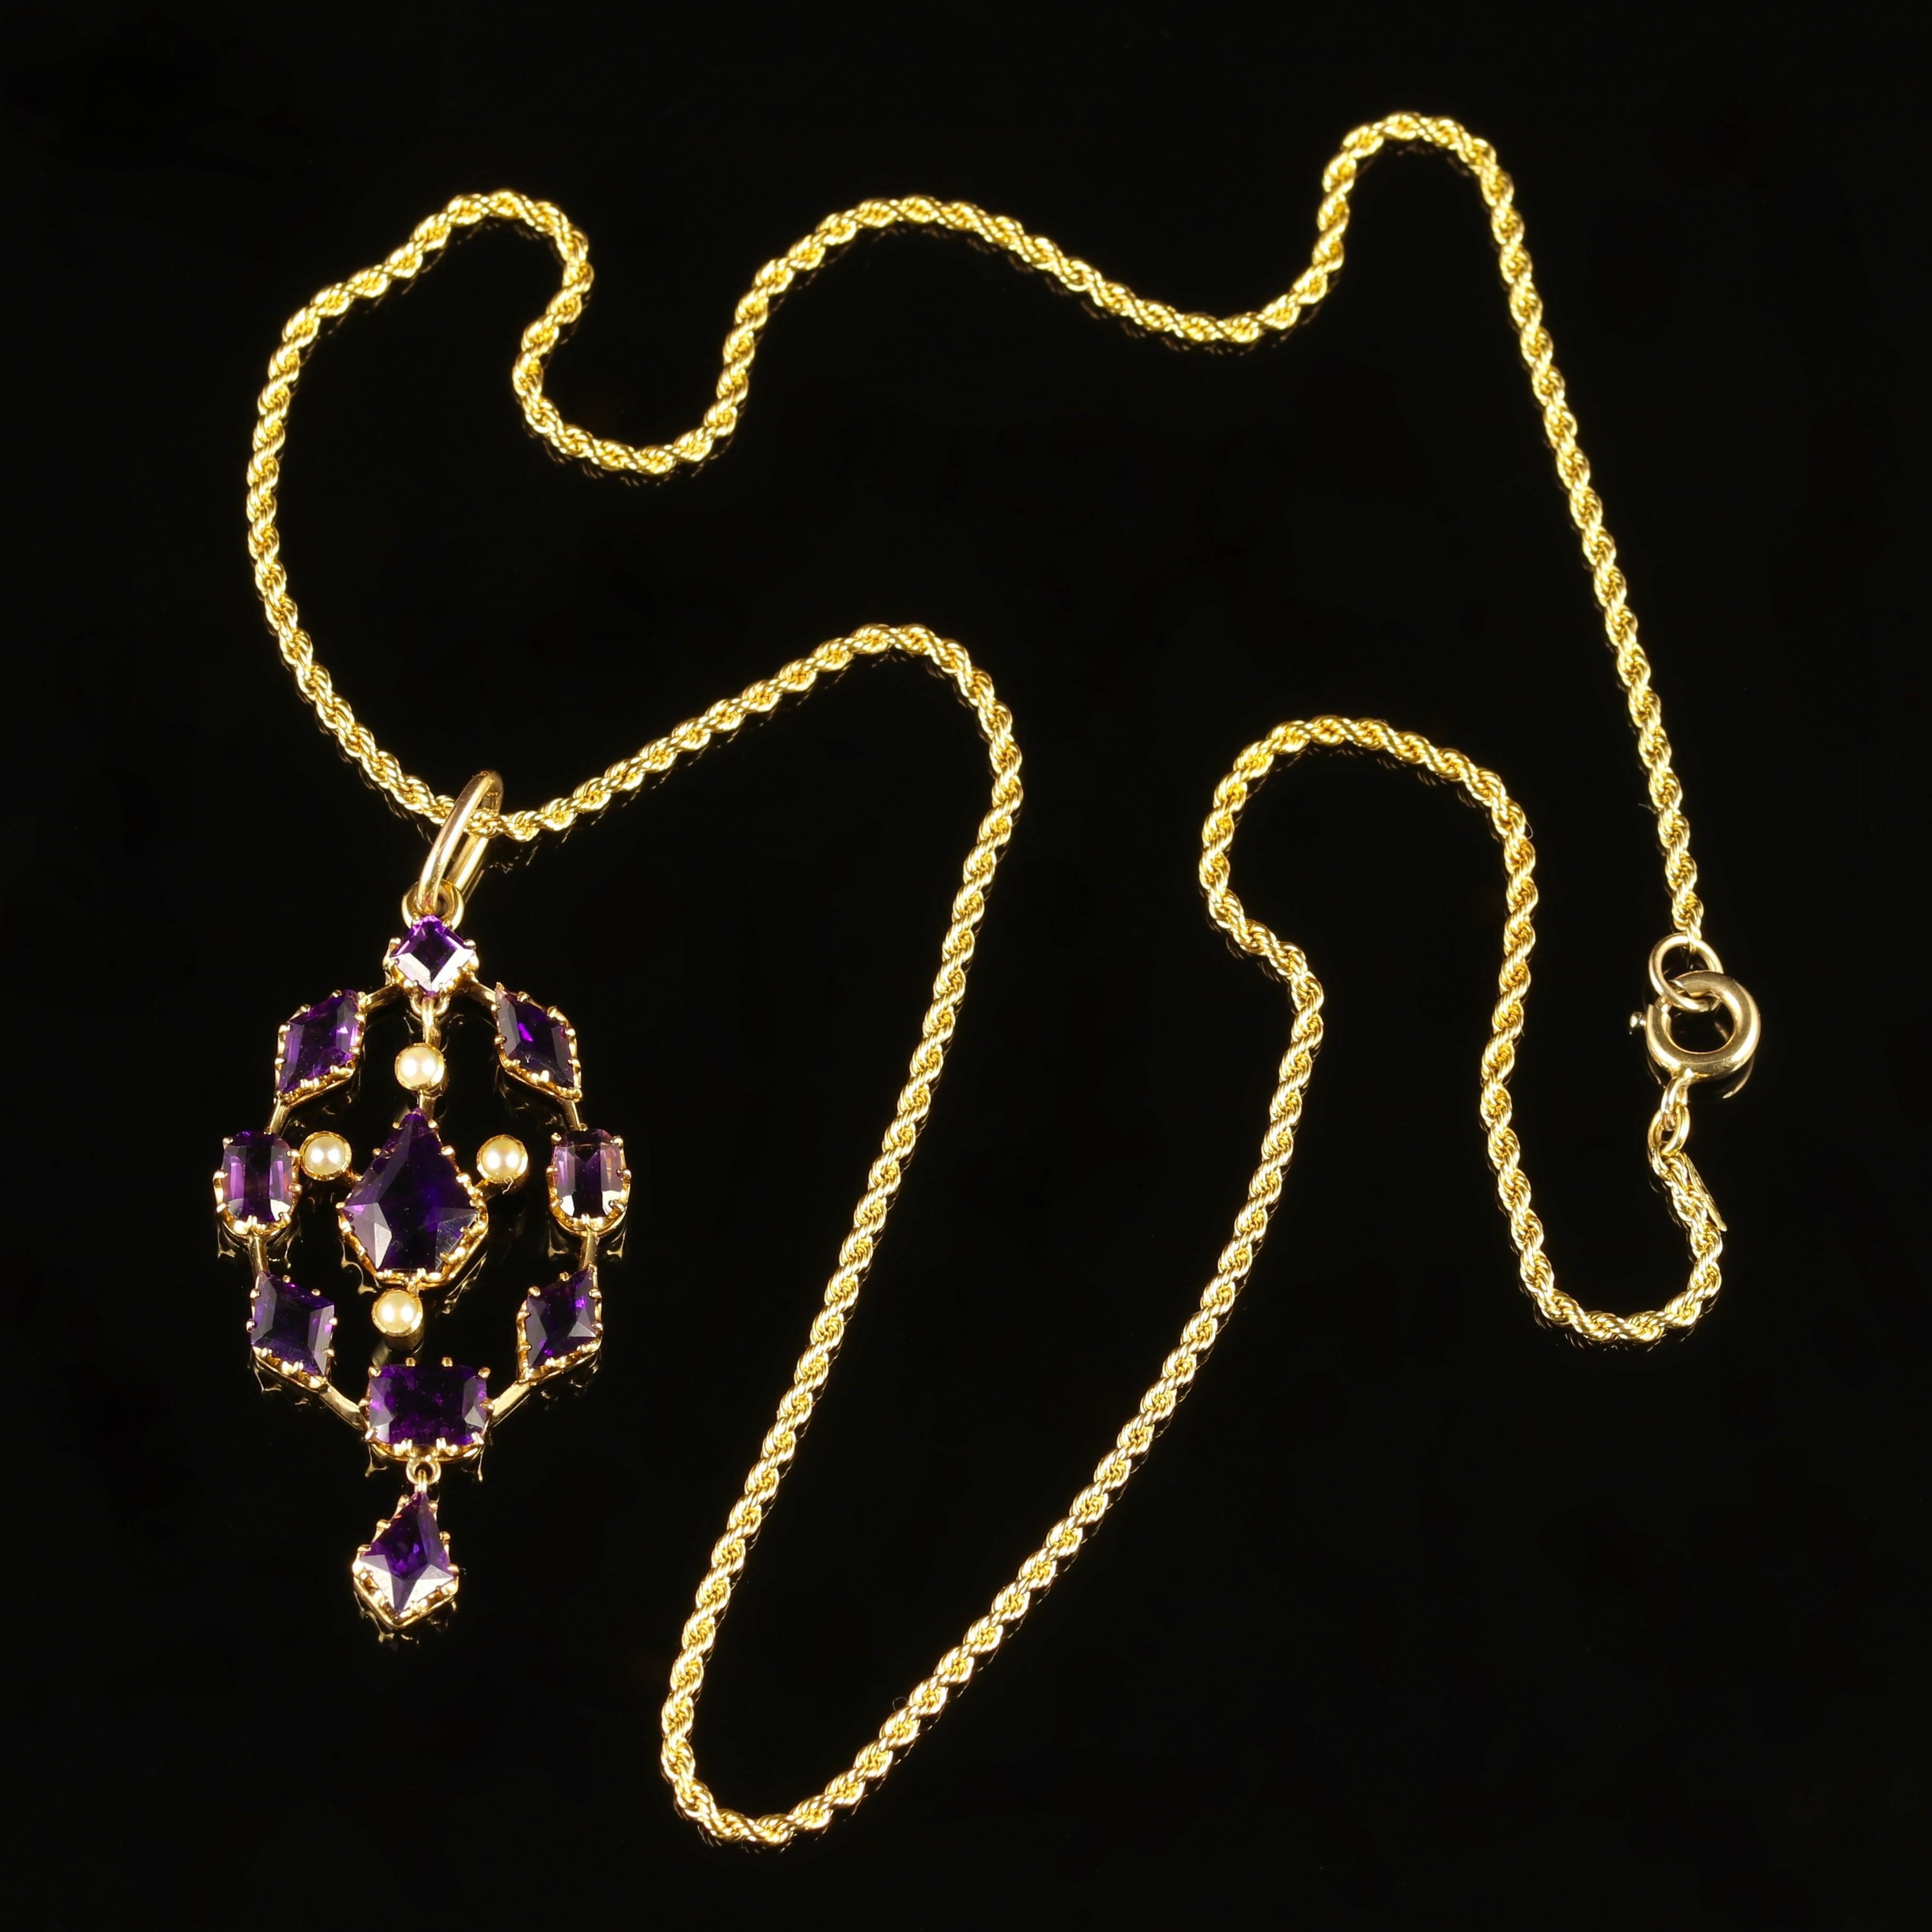 Antique Victorian Amethyst Pendant and Necklace 15 Carat Gold 1